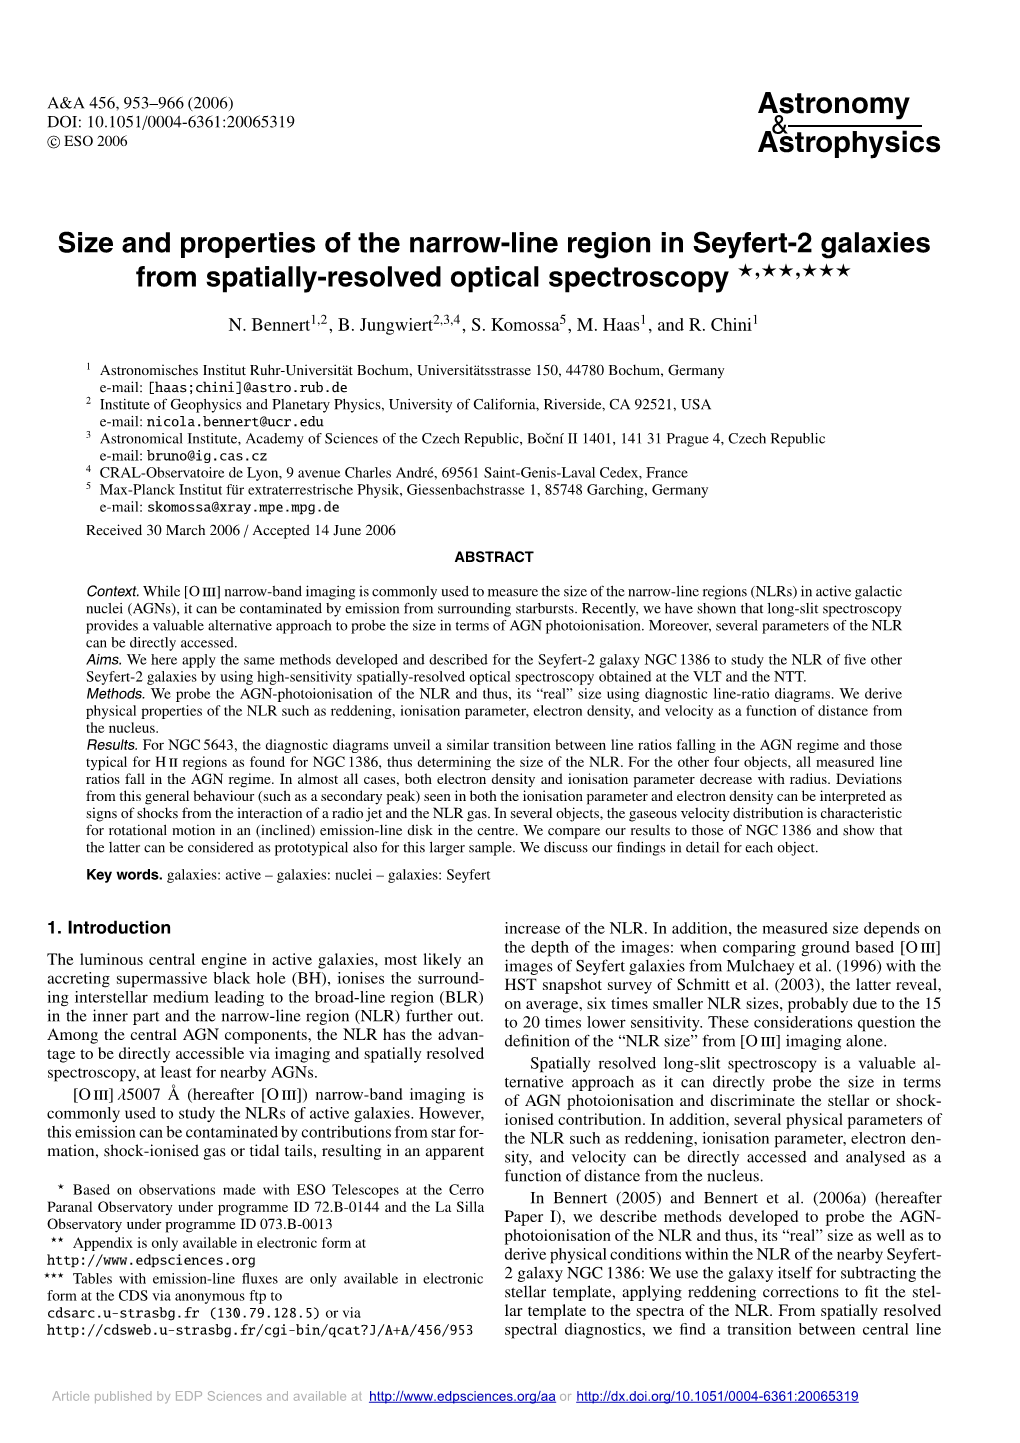 Size and Properties of the Narrow-Line Region in Seyfert-2 Galaxies from Spatially-Resolved Optical Spectroscopy �,��,�